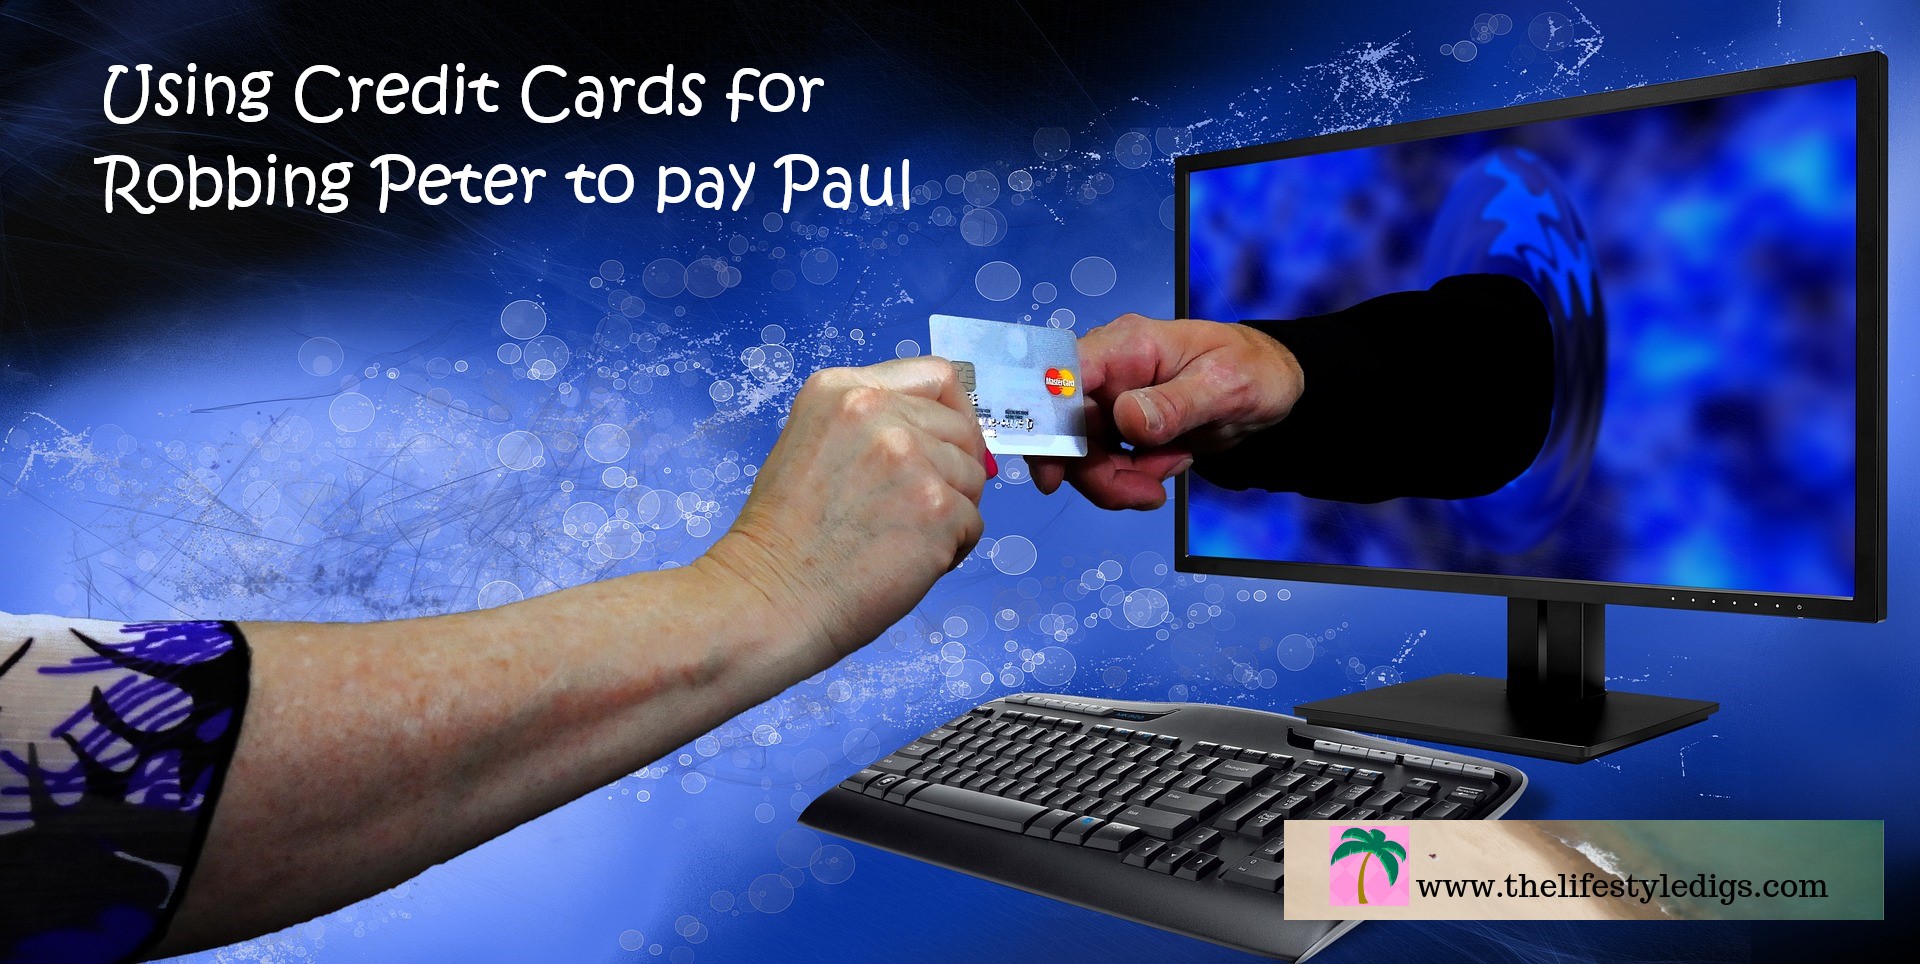 Using Credit Cards for Robbing Peter to pay Paul